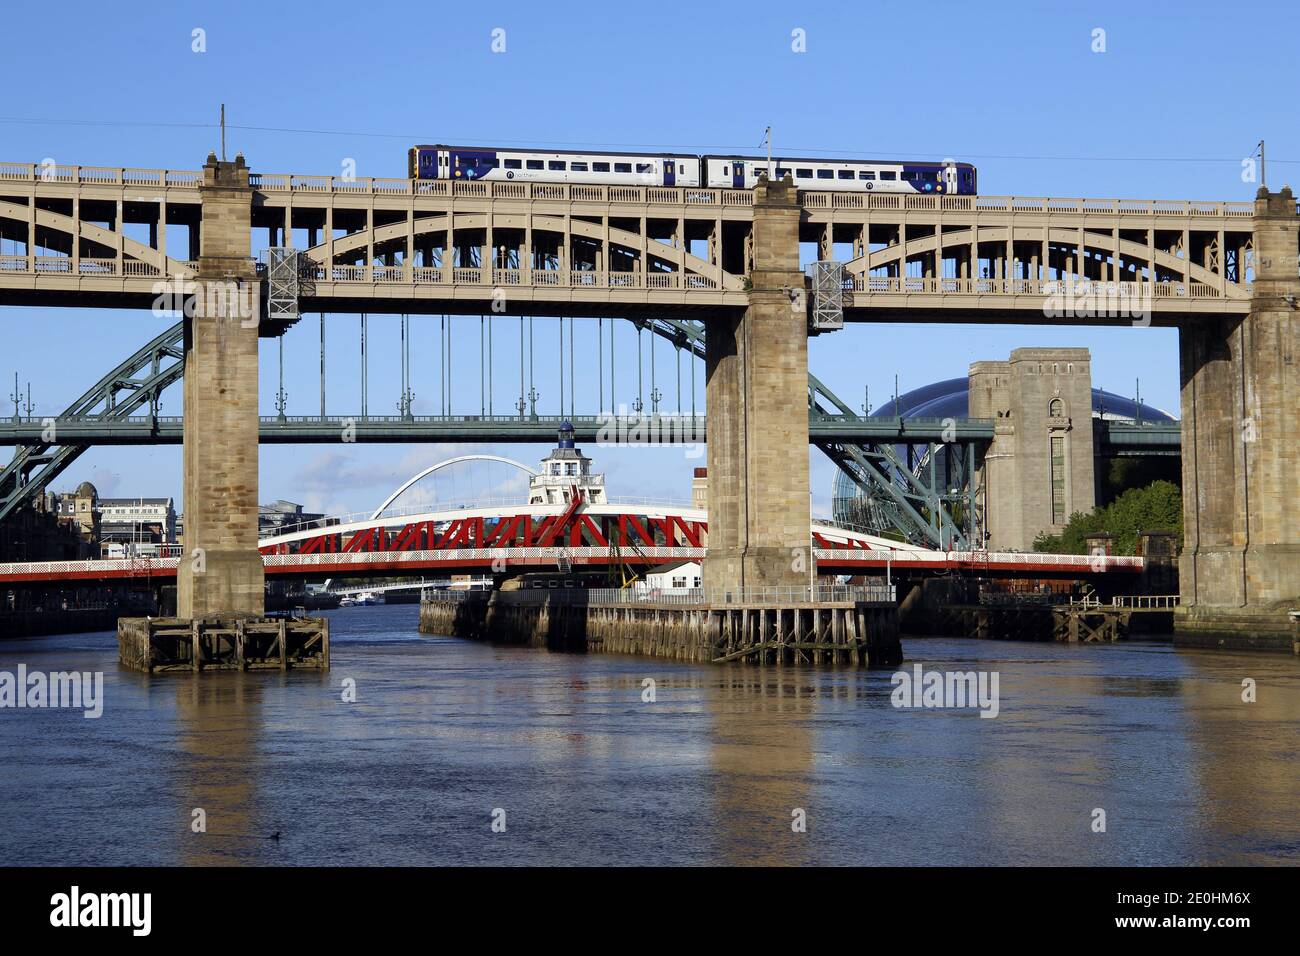 Northern Trains Limited train crossing the High Level Bridge over the River Tyne in newcastle Upon Tyne, England Stock Photo